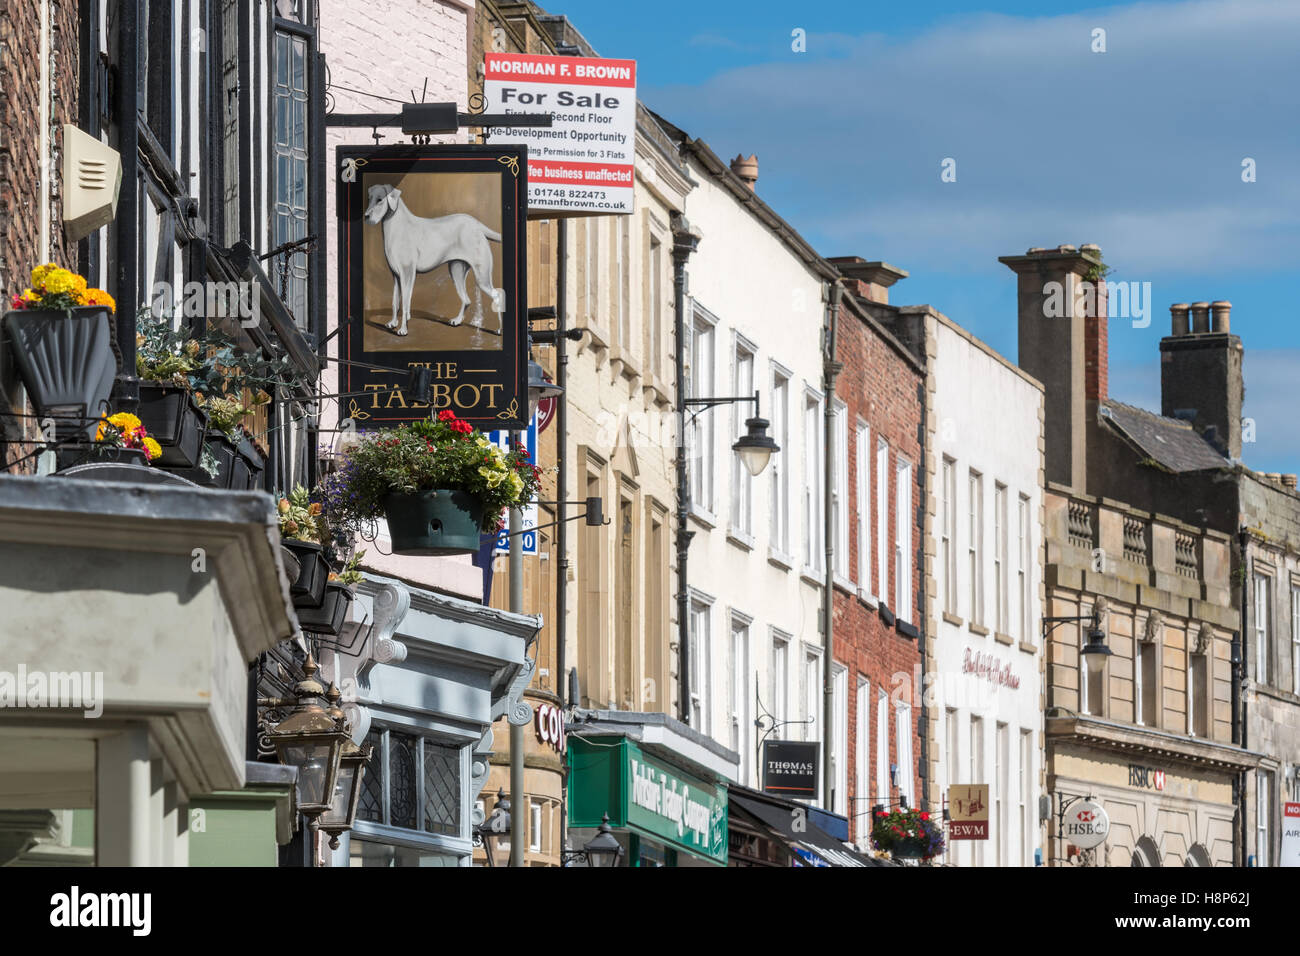 UK, England, Yorkshire, Richmond - A strip of local shops in the city of Richmond located in Northern Yorkshire. Stock Photo